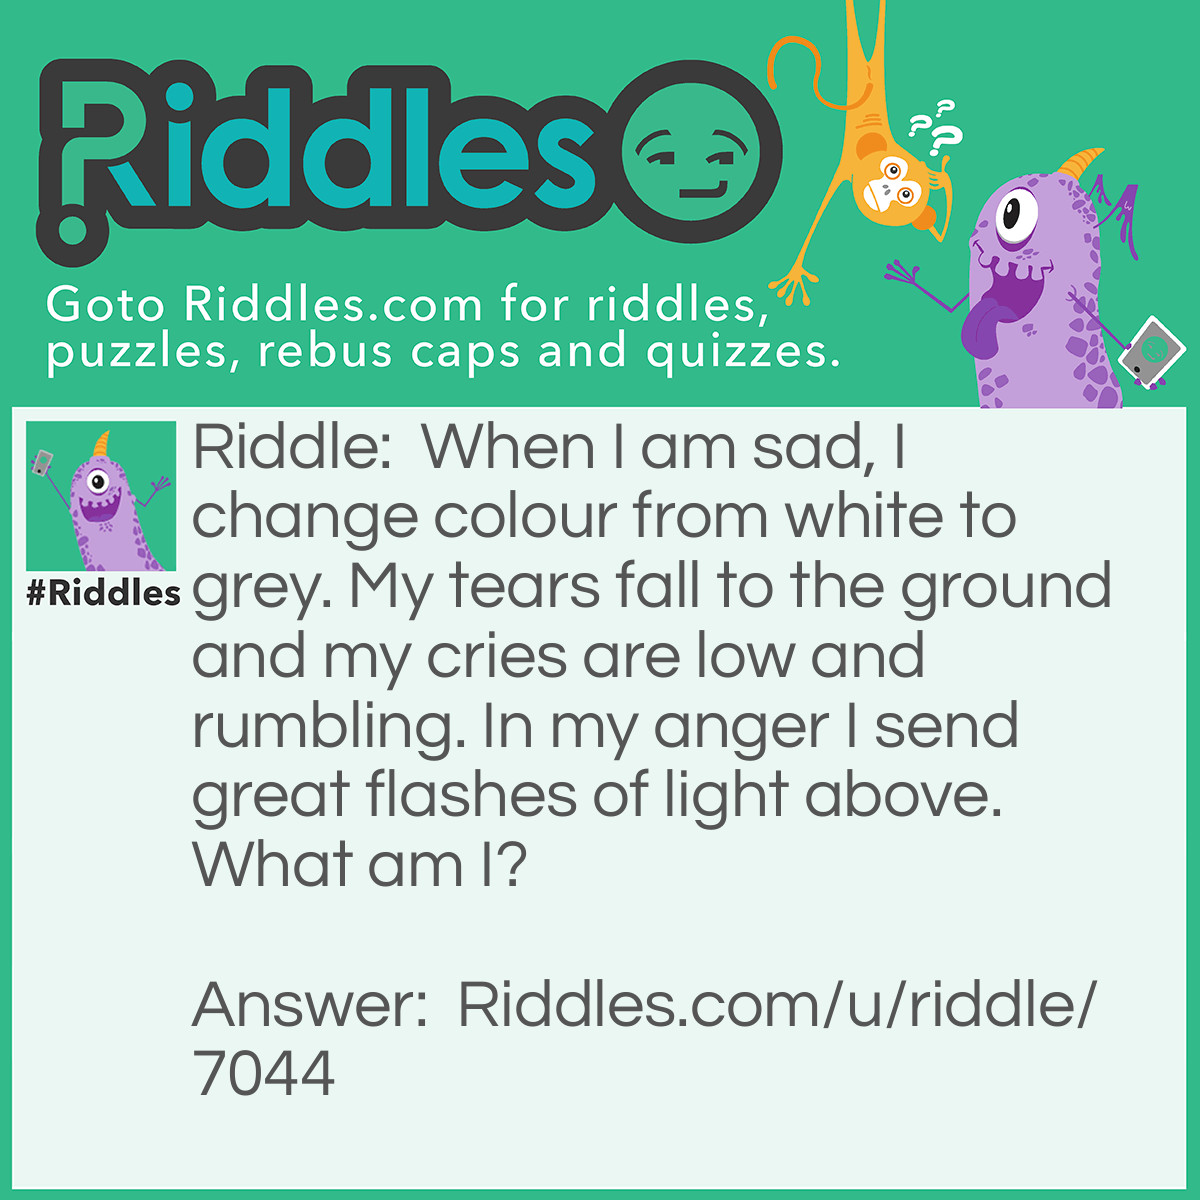 Riddle: When I am sad, I change colour from white to grey. My tears fall to the ground and my cries are low and rumbling. In my anger I send great flashes of light above. What am I? Answer: A cloud.